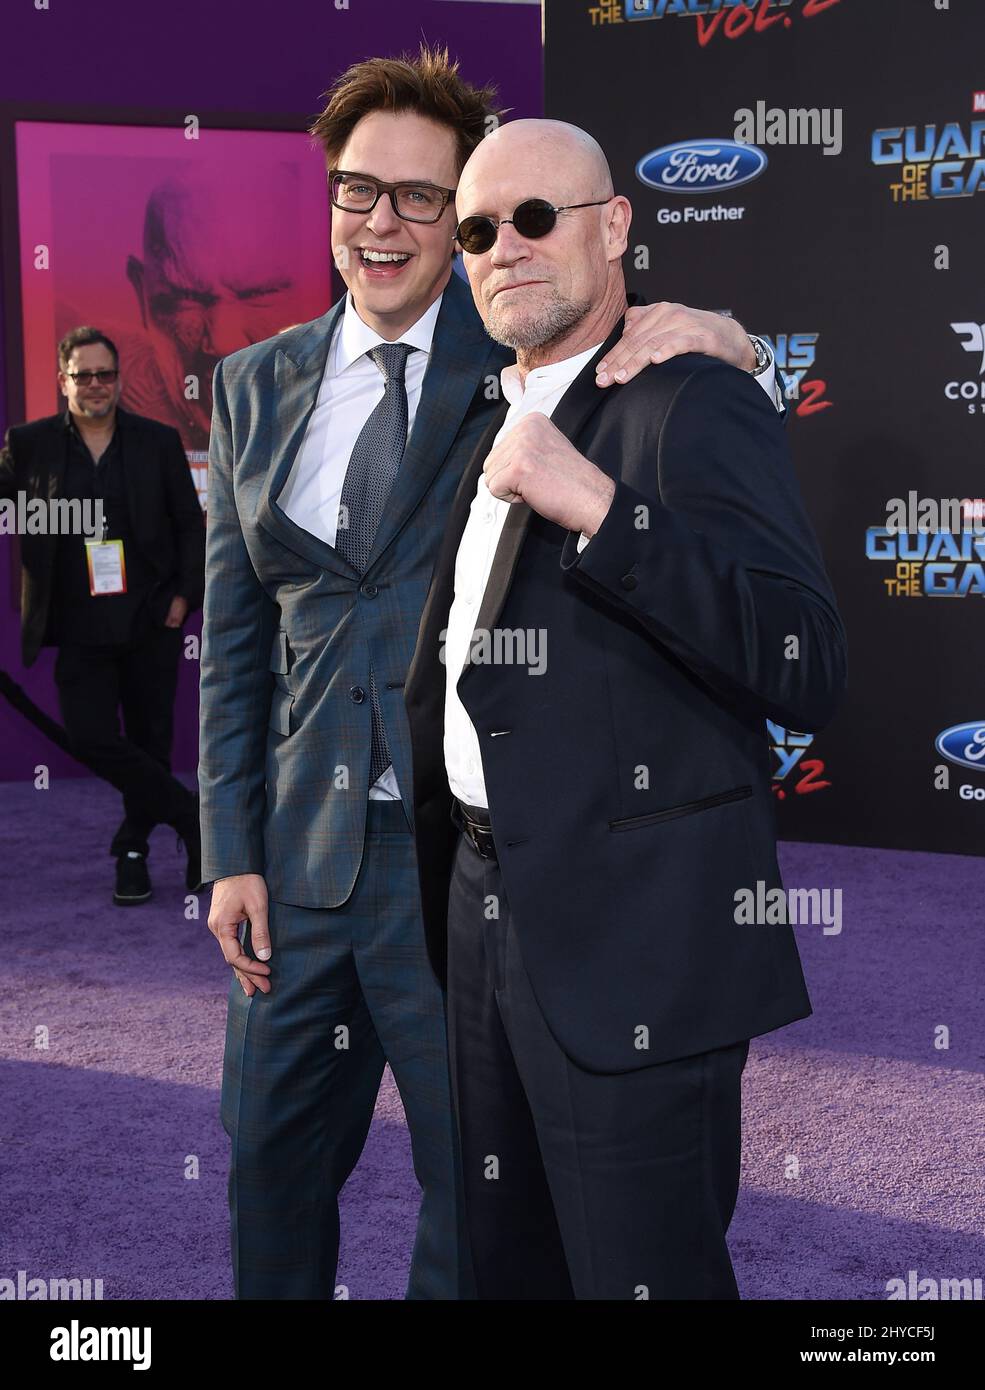 James Gunn and Michael Rooker attending the world premiere of Guardians of the Galaxy Vol. 2 in Los Angeles Stock Photo